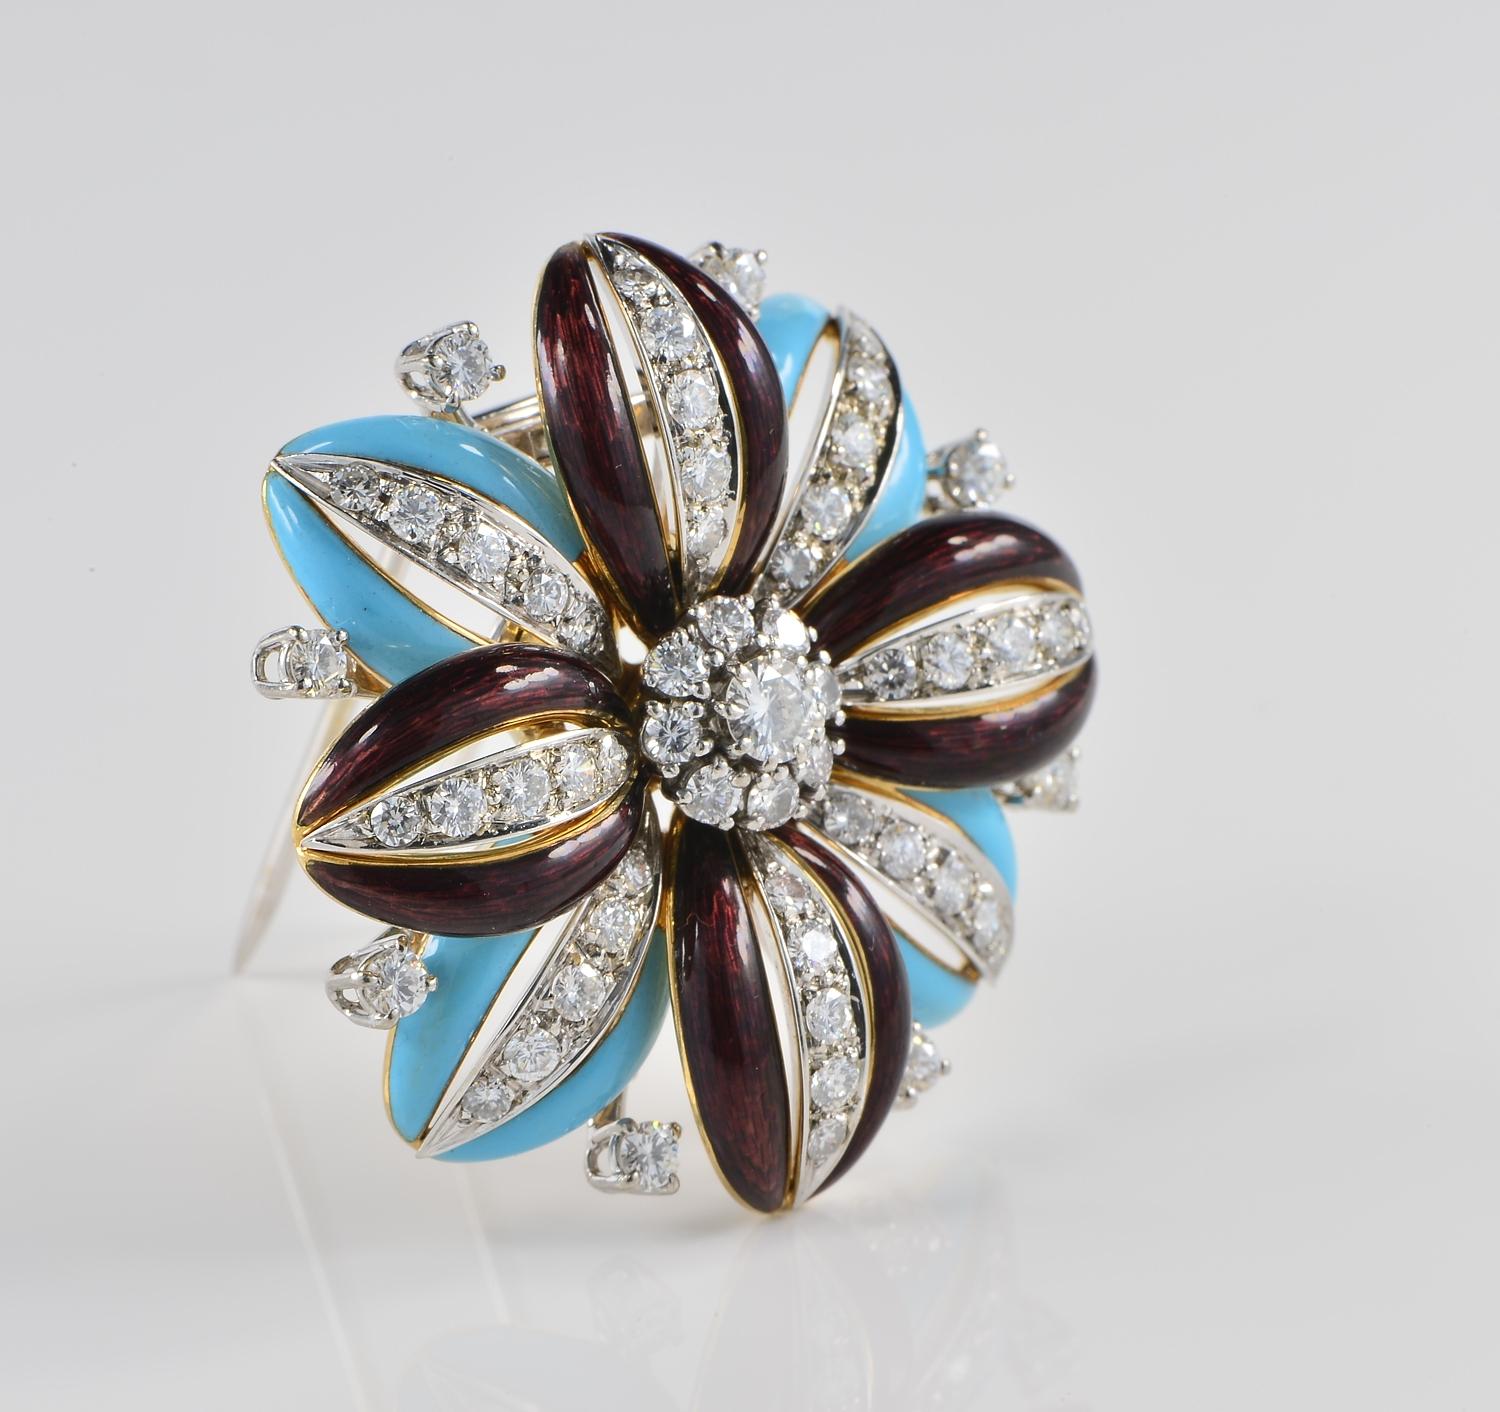 Large beautiful design flower boasting exquisite top quality past craftsmanship made of solid 18KT white and rose gold.
Three dimensional multi petals adorned by Turquoise and Aubergine colour enamelling work fully highlighted by approx 2.95 CT of